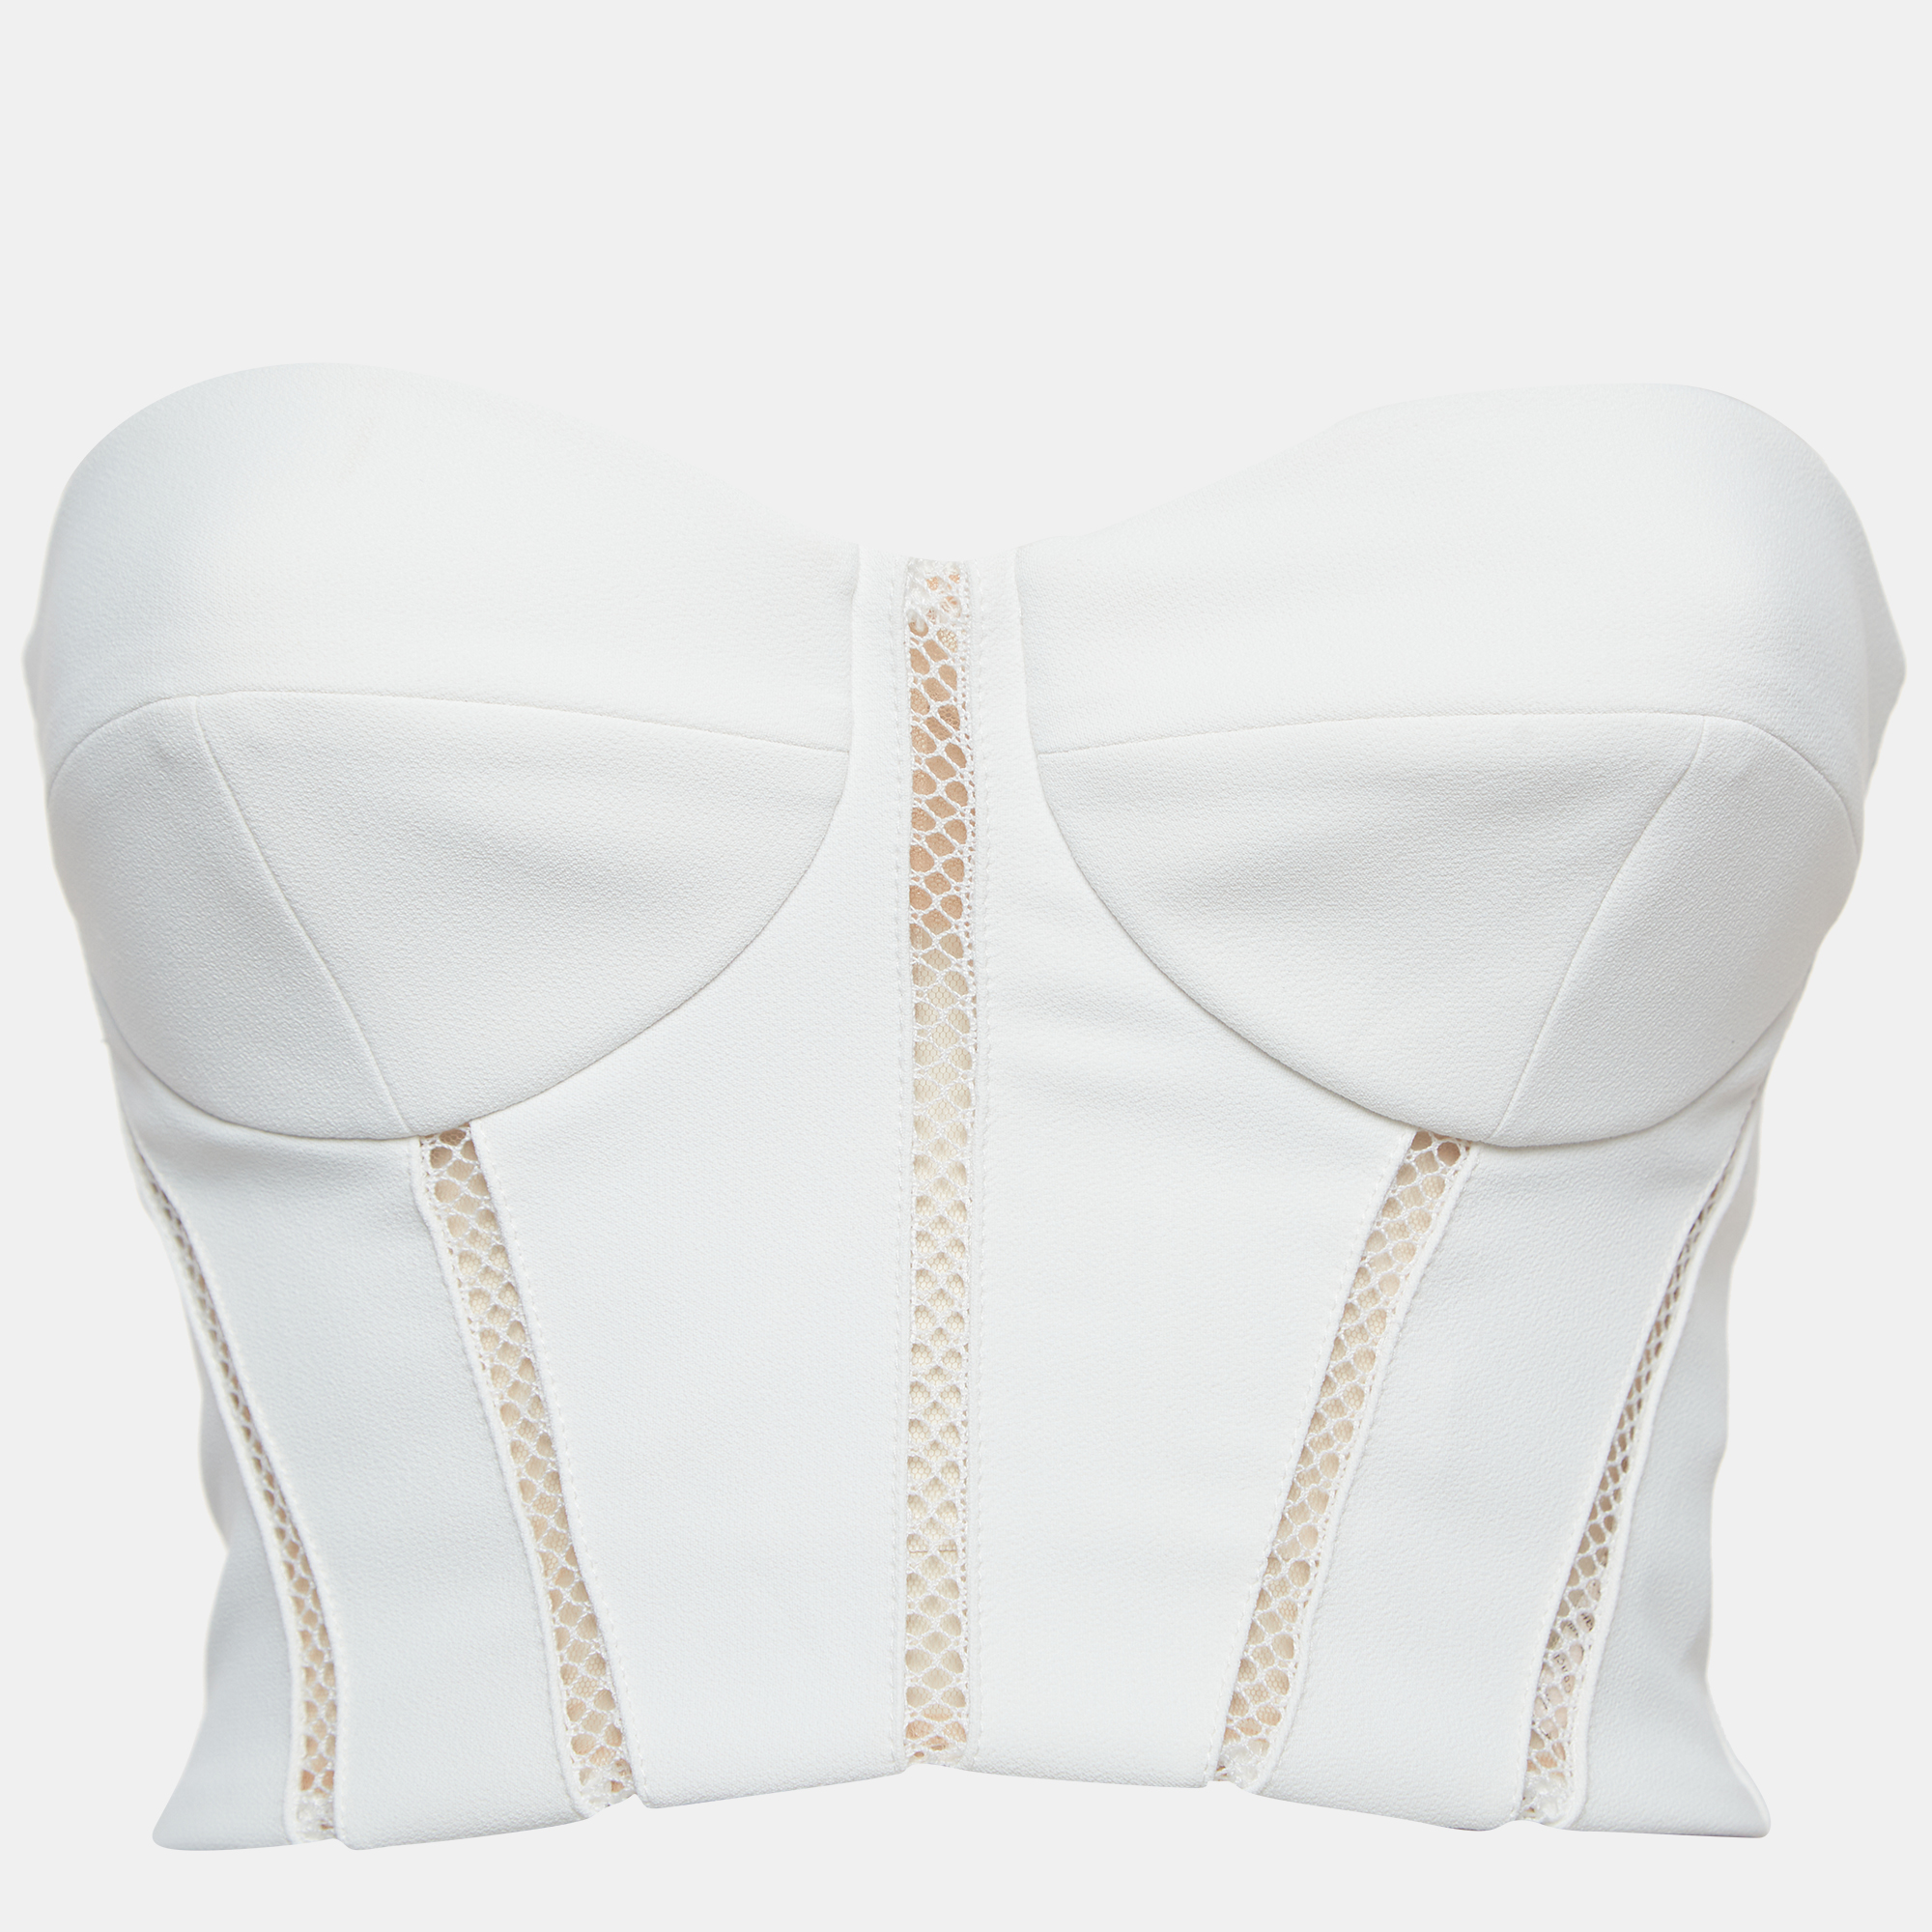 Elisabetta Franchi White Crepe Strapless Padded Crop Top S